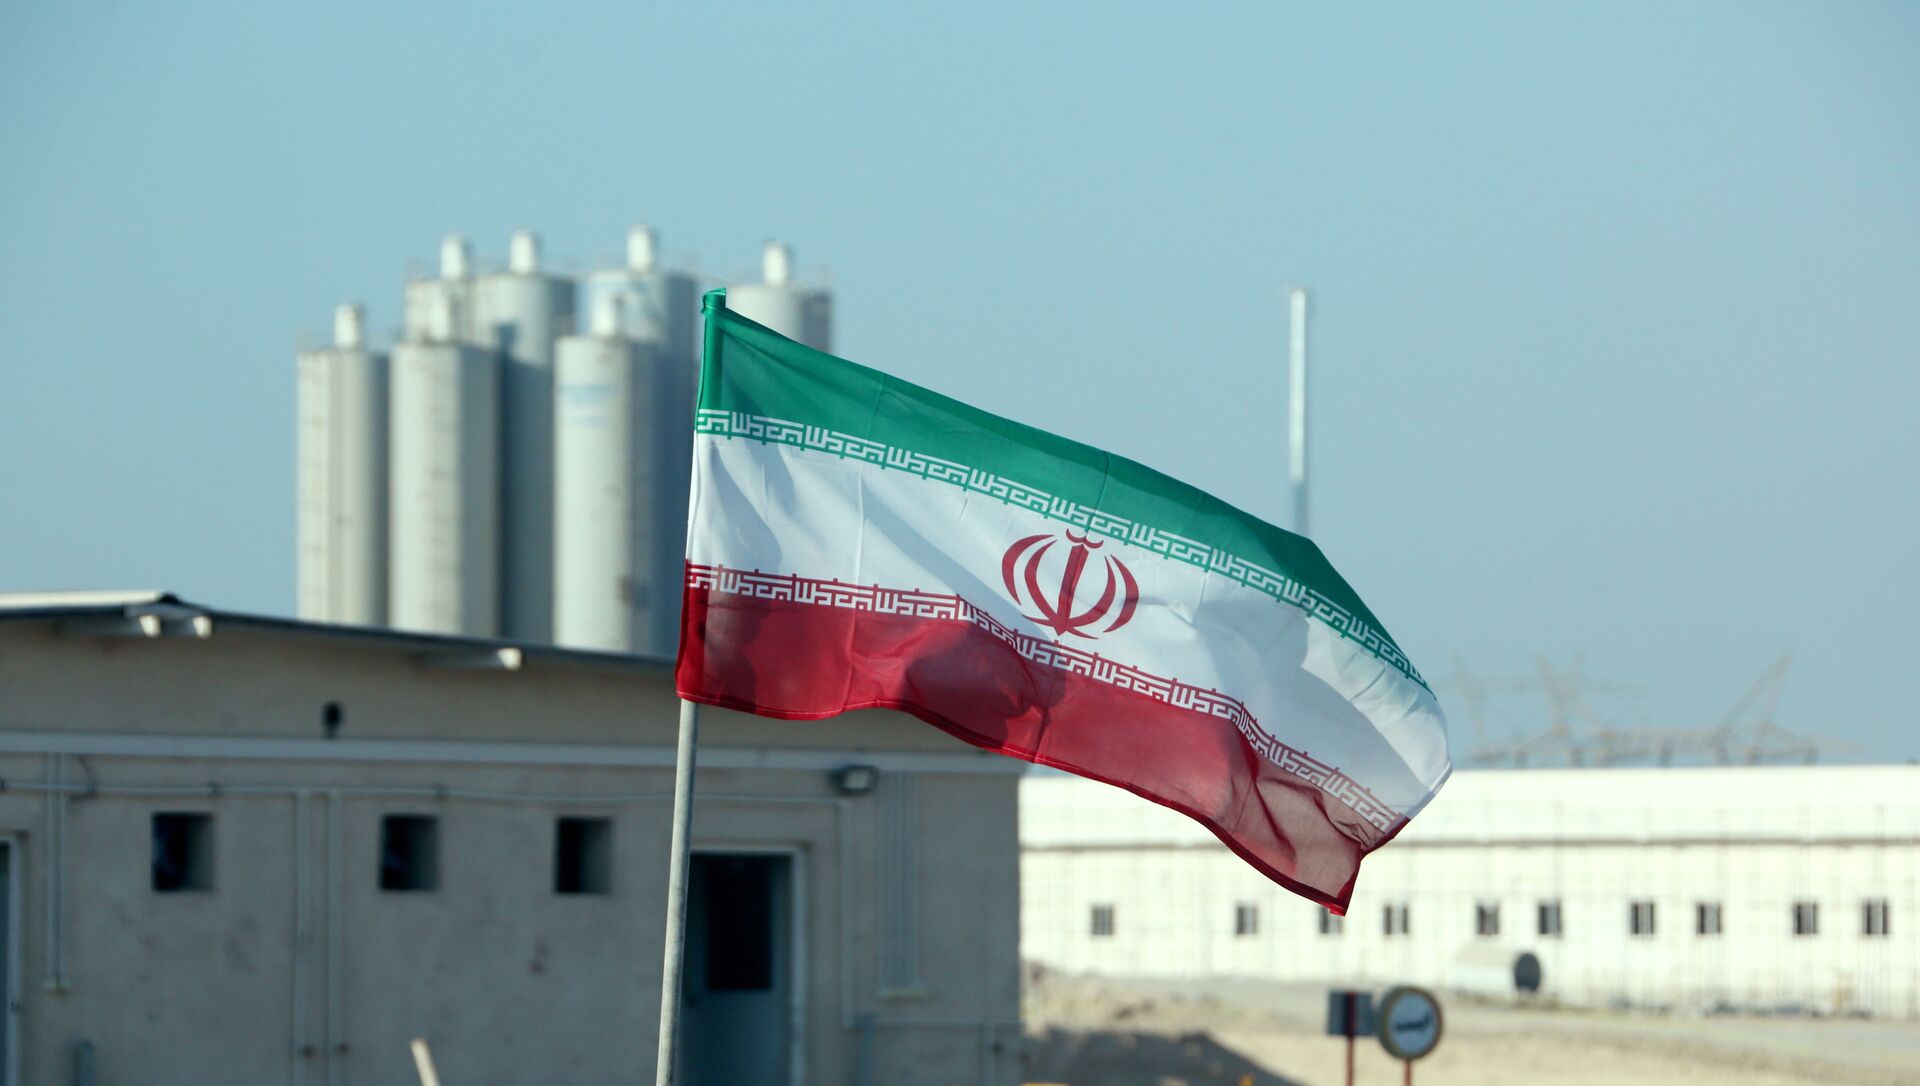 A picture taken on November 10, 2019, shows an Iranian flag in Iran's Bushehr nuclear power plant, during an official ceremony to kick-start works on a second reactor at the facility. - Bushehr is Iran's only nuclear power station and is currently running on imported fuel from Russia that is closely monitored by the UN's International Atomic Energy Agency. - Sputnik International, 1920, 15.02.2021